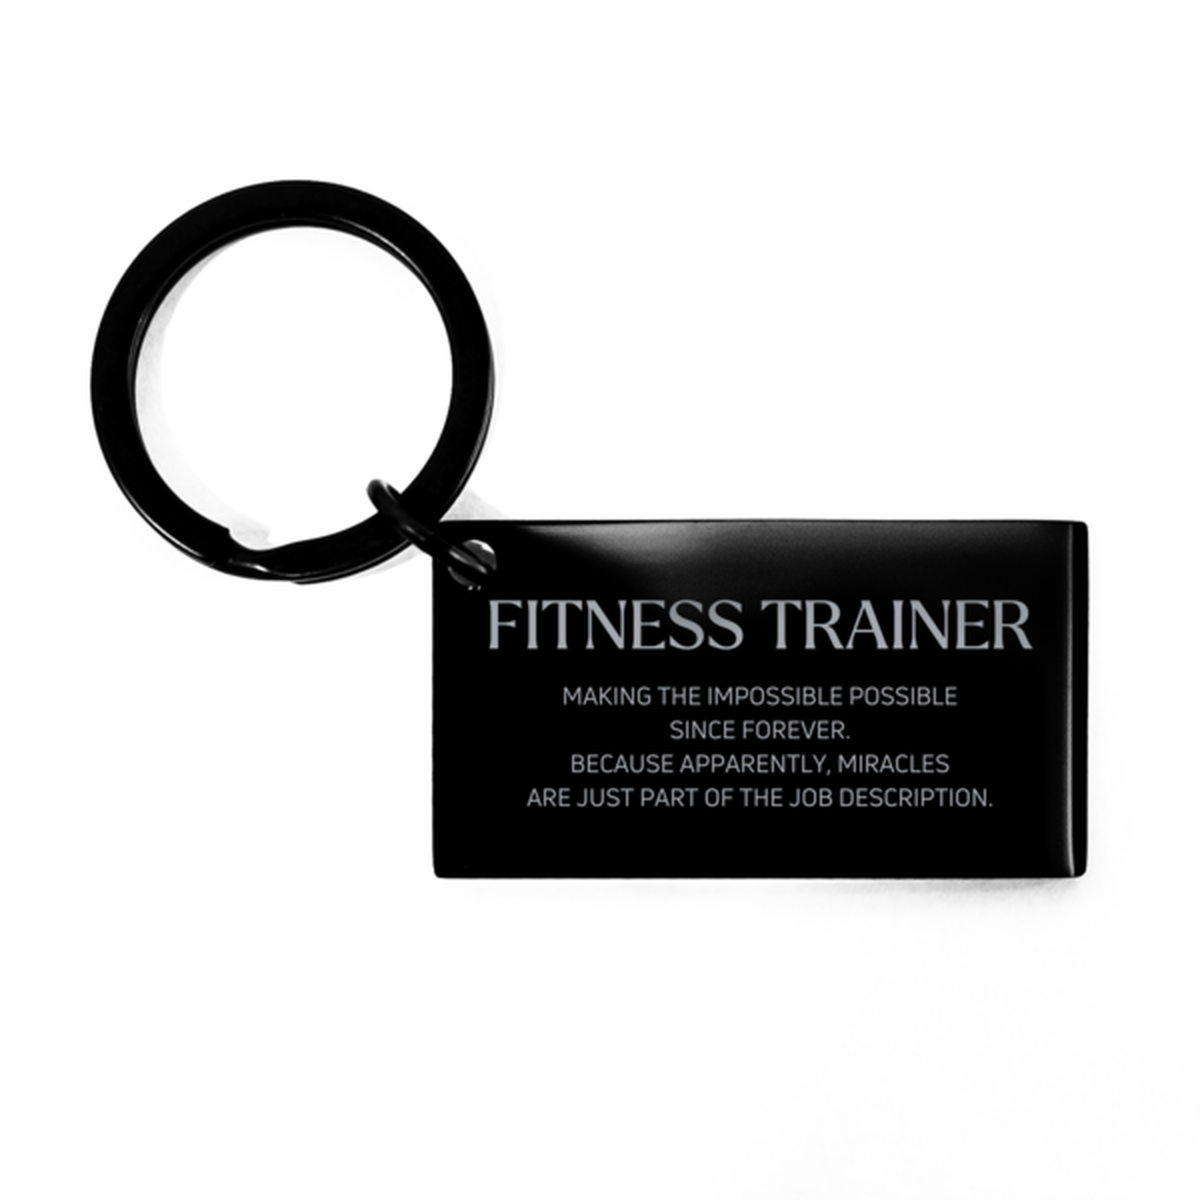 Funny Fitness Trainer Gifts, Miracles are just part of the job description, Inspirational Birthday Keychain For Fitness Trainer, Men, Women, Coworkers, Friends, Boss